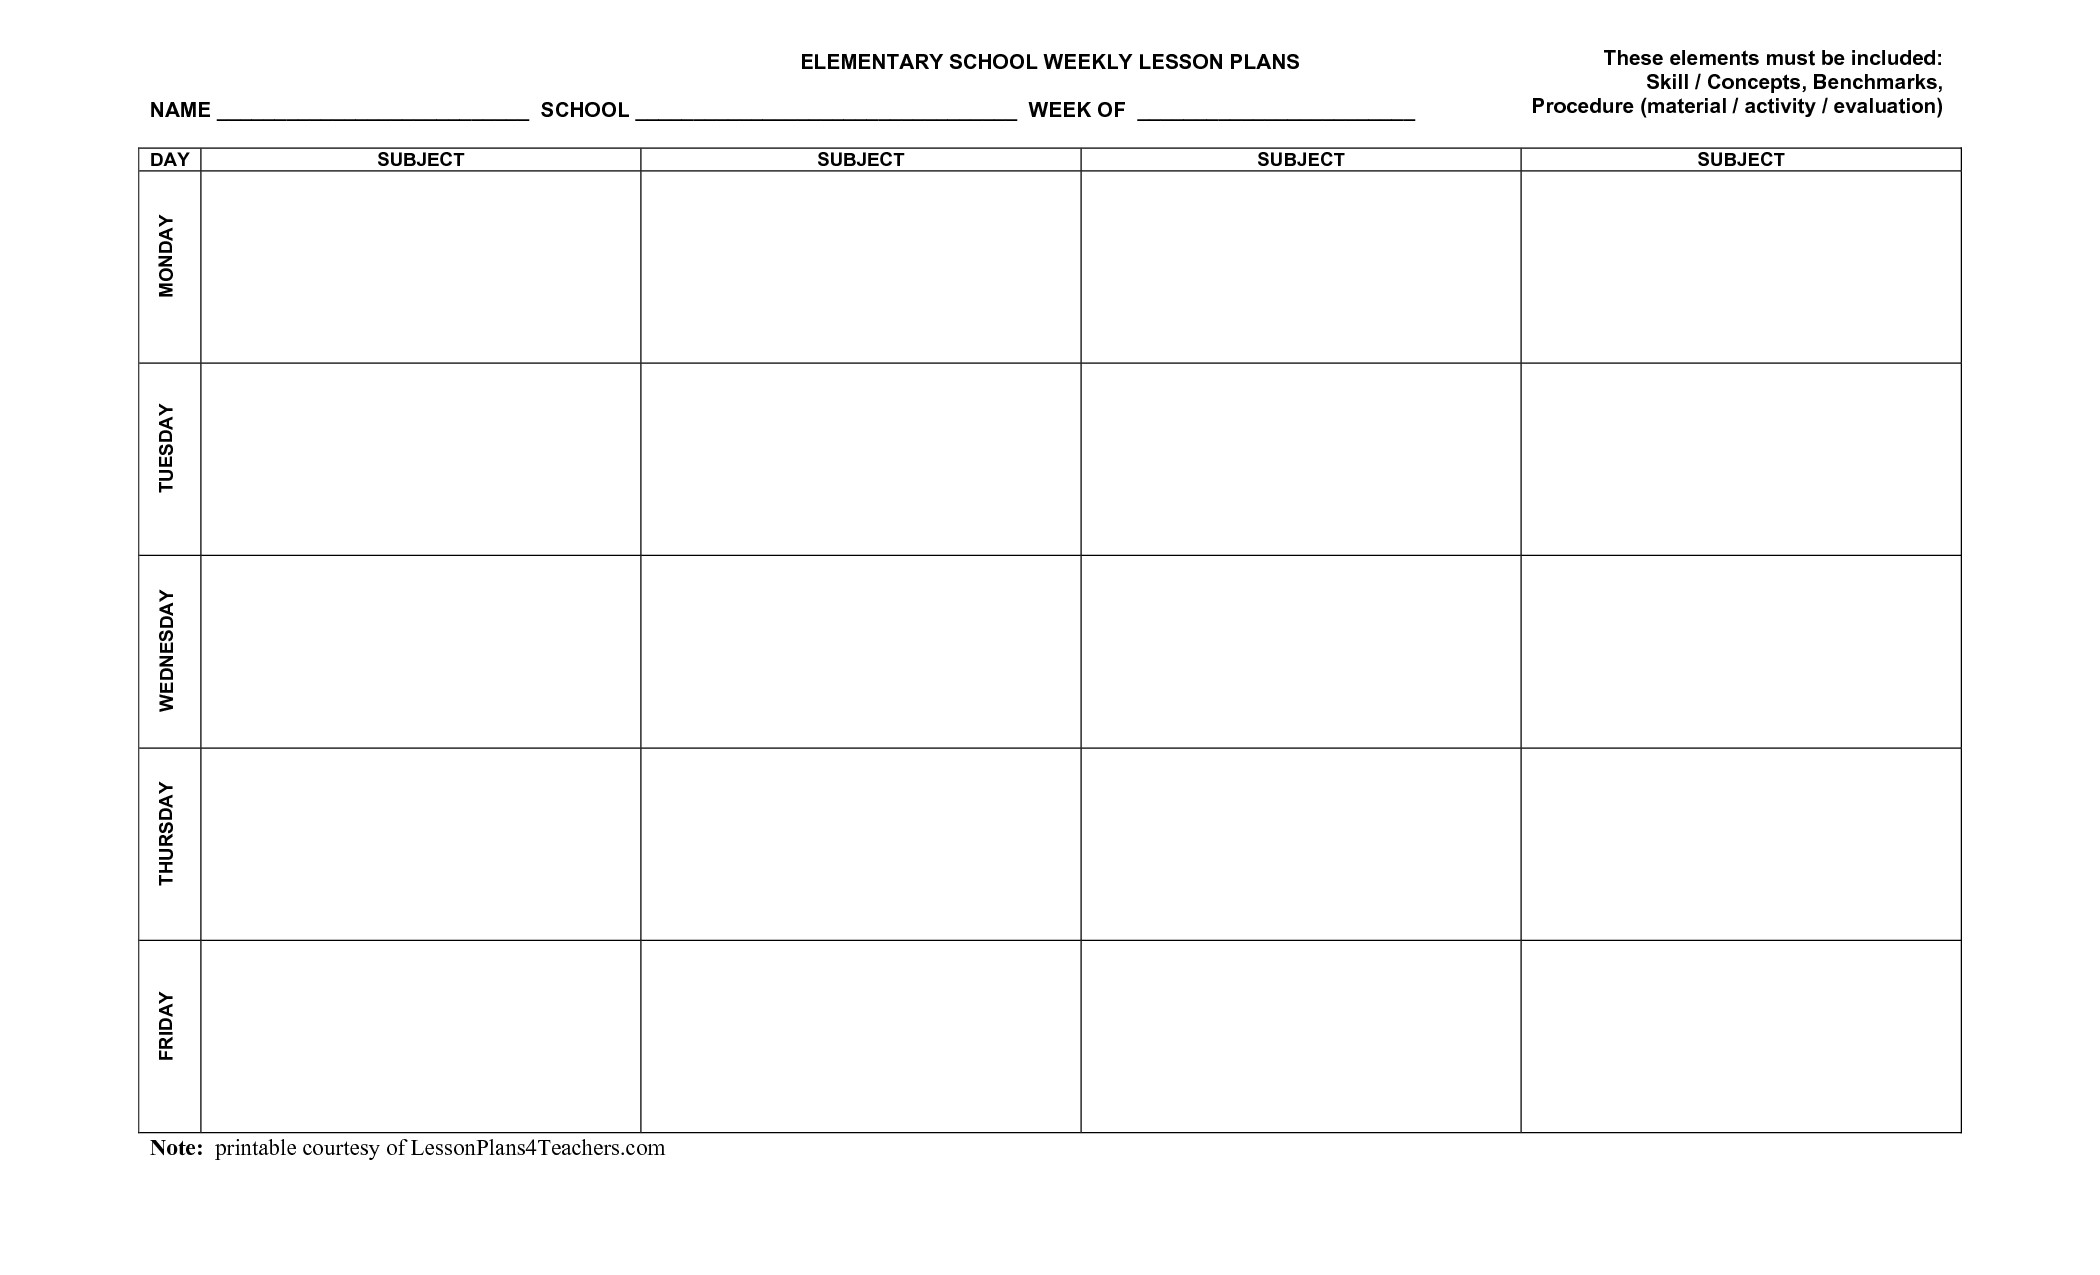 Weekly Lesson Plan Template Elementary Blank Weekly Lesson Plan Templates Zp1trfbu